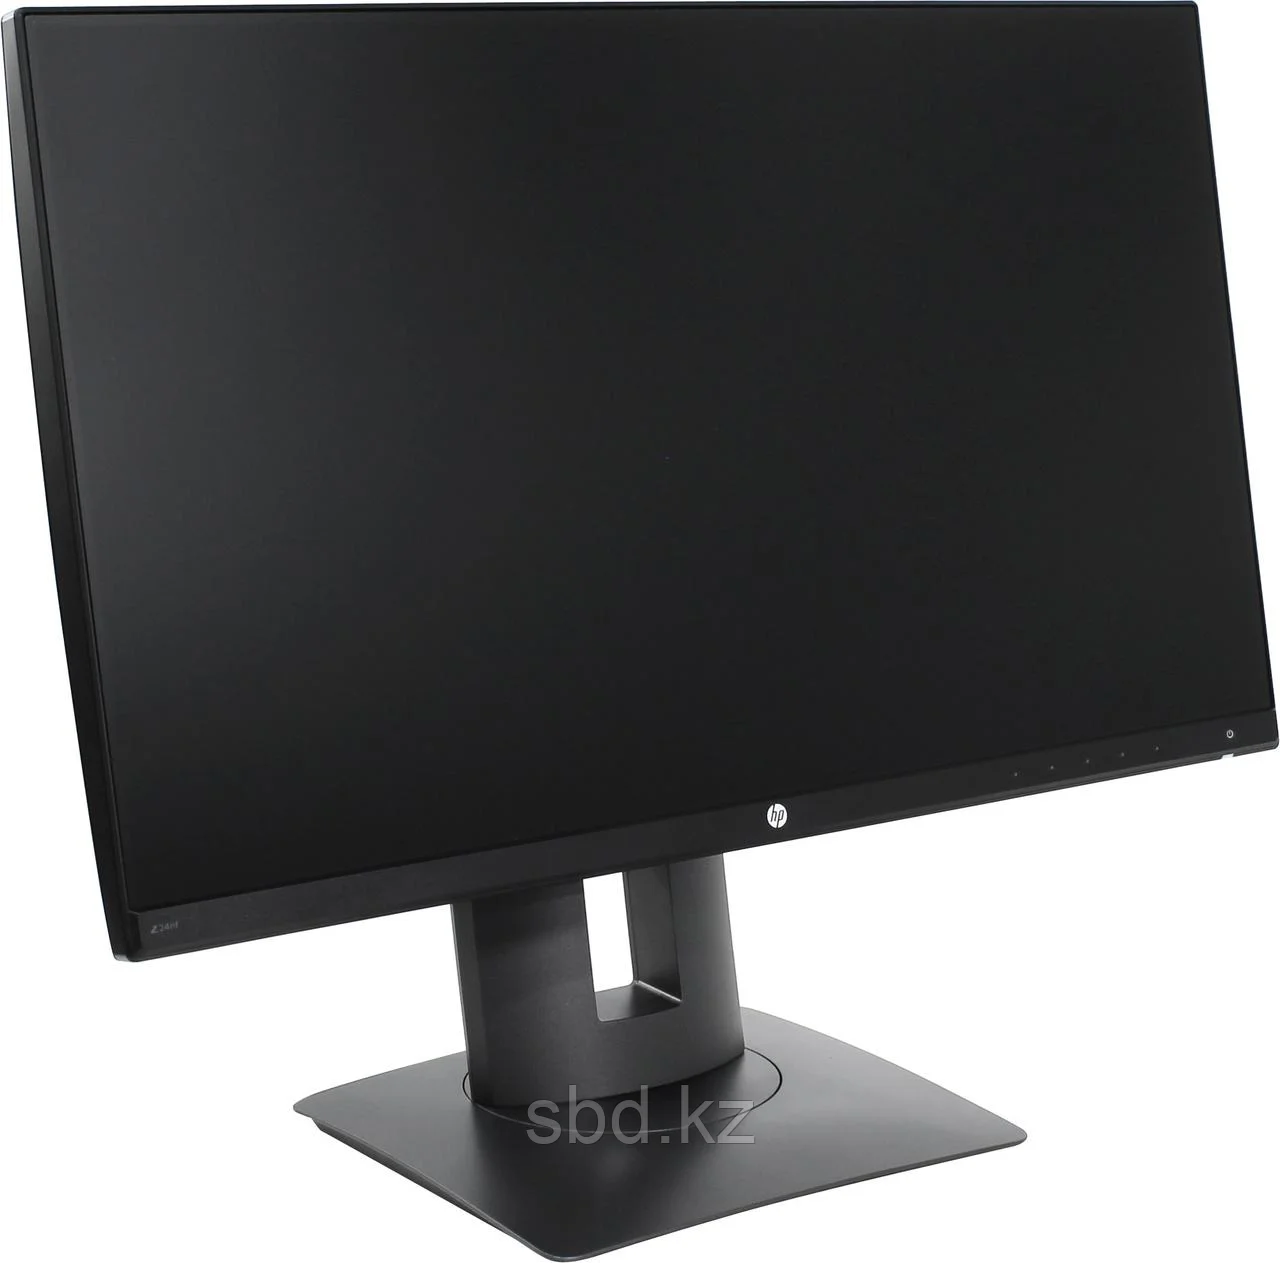 Hp Inch 24 Flameless Monitor Model Z24Nf With 4 Usb Port(Blue Port) 2 Display Port And Dvi Full Hd